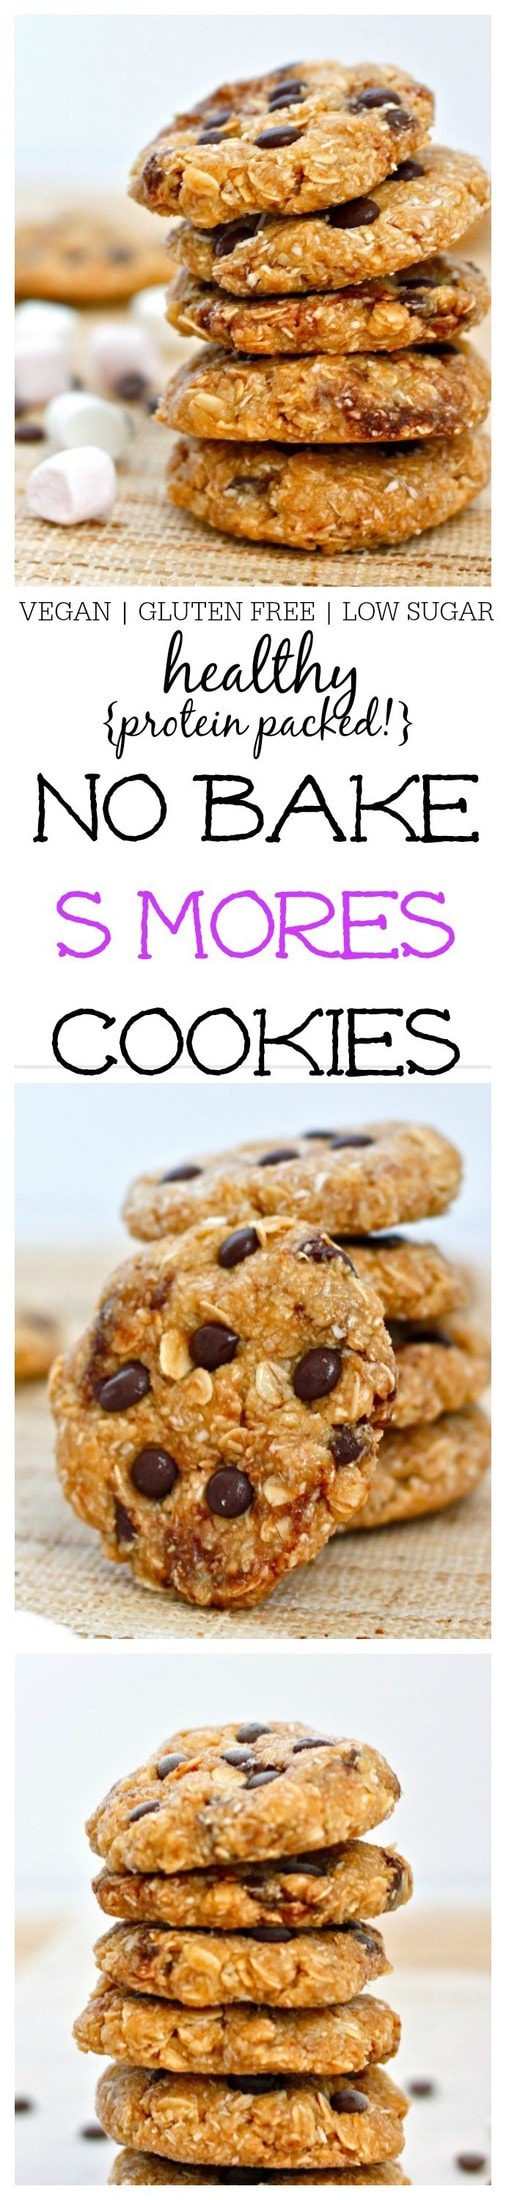 Healthy No Bake S'mores Cookies- Soft and chewy cookies which take 10 minutes to whip up- Vegan, GF + chock full of protein! @thebigmansworld - thebigmansworld.com